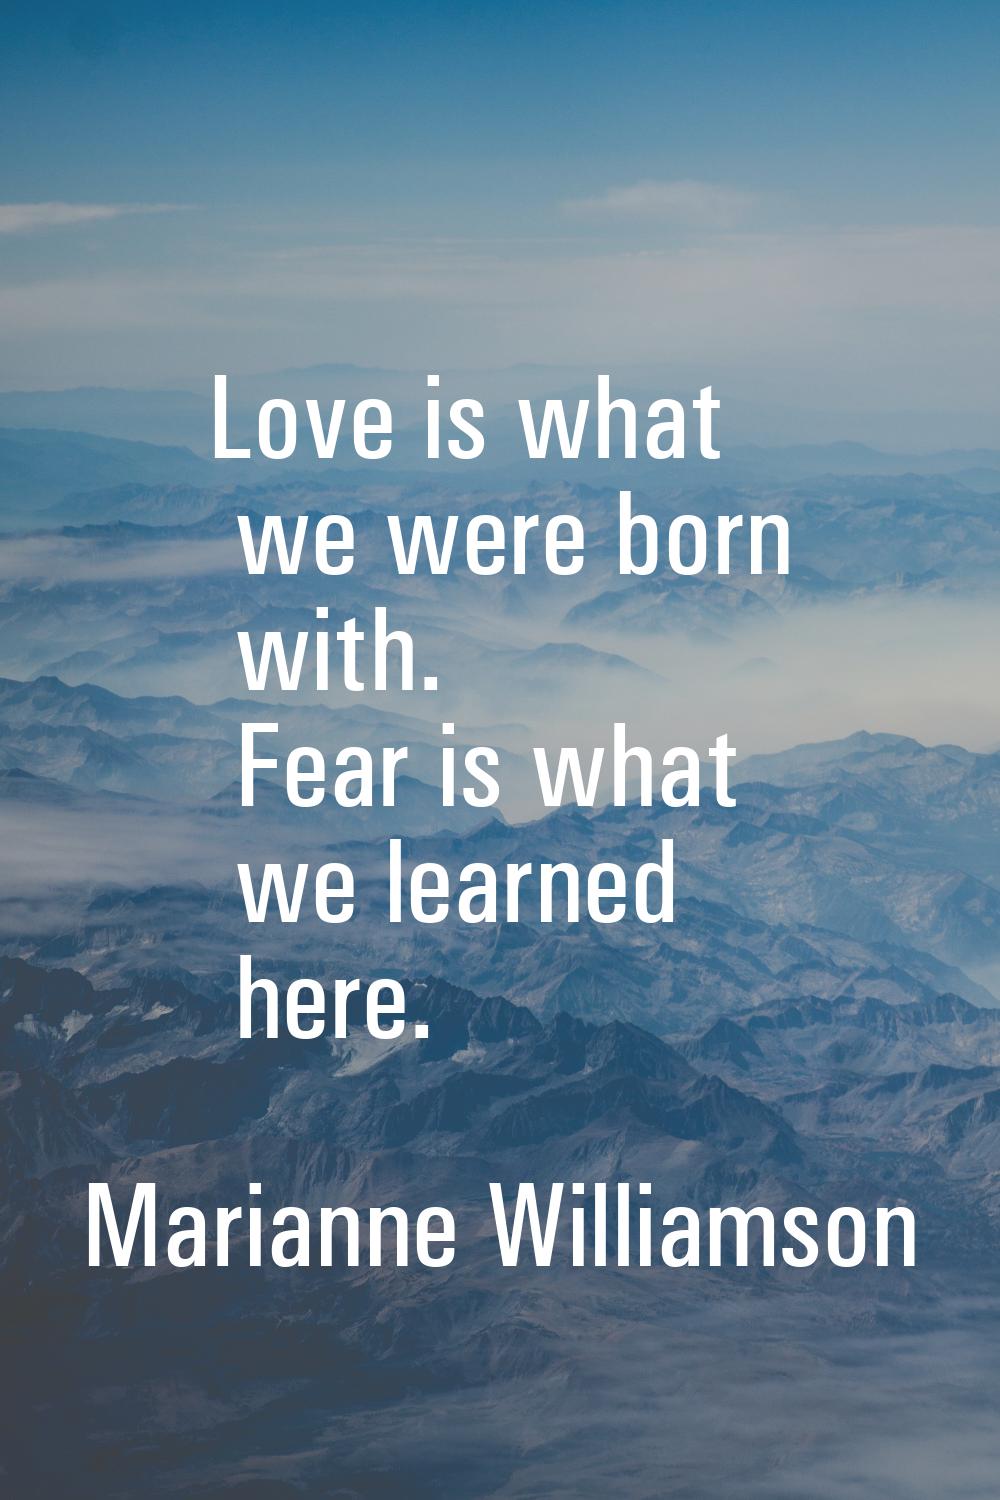 Love is what we were born with. Fear is what we learned here.